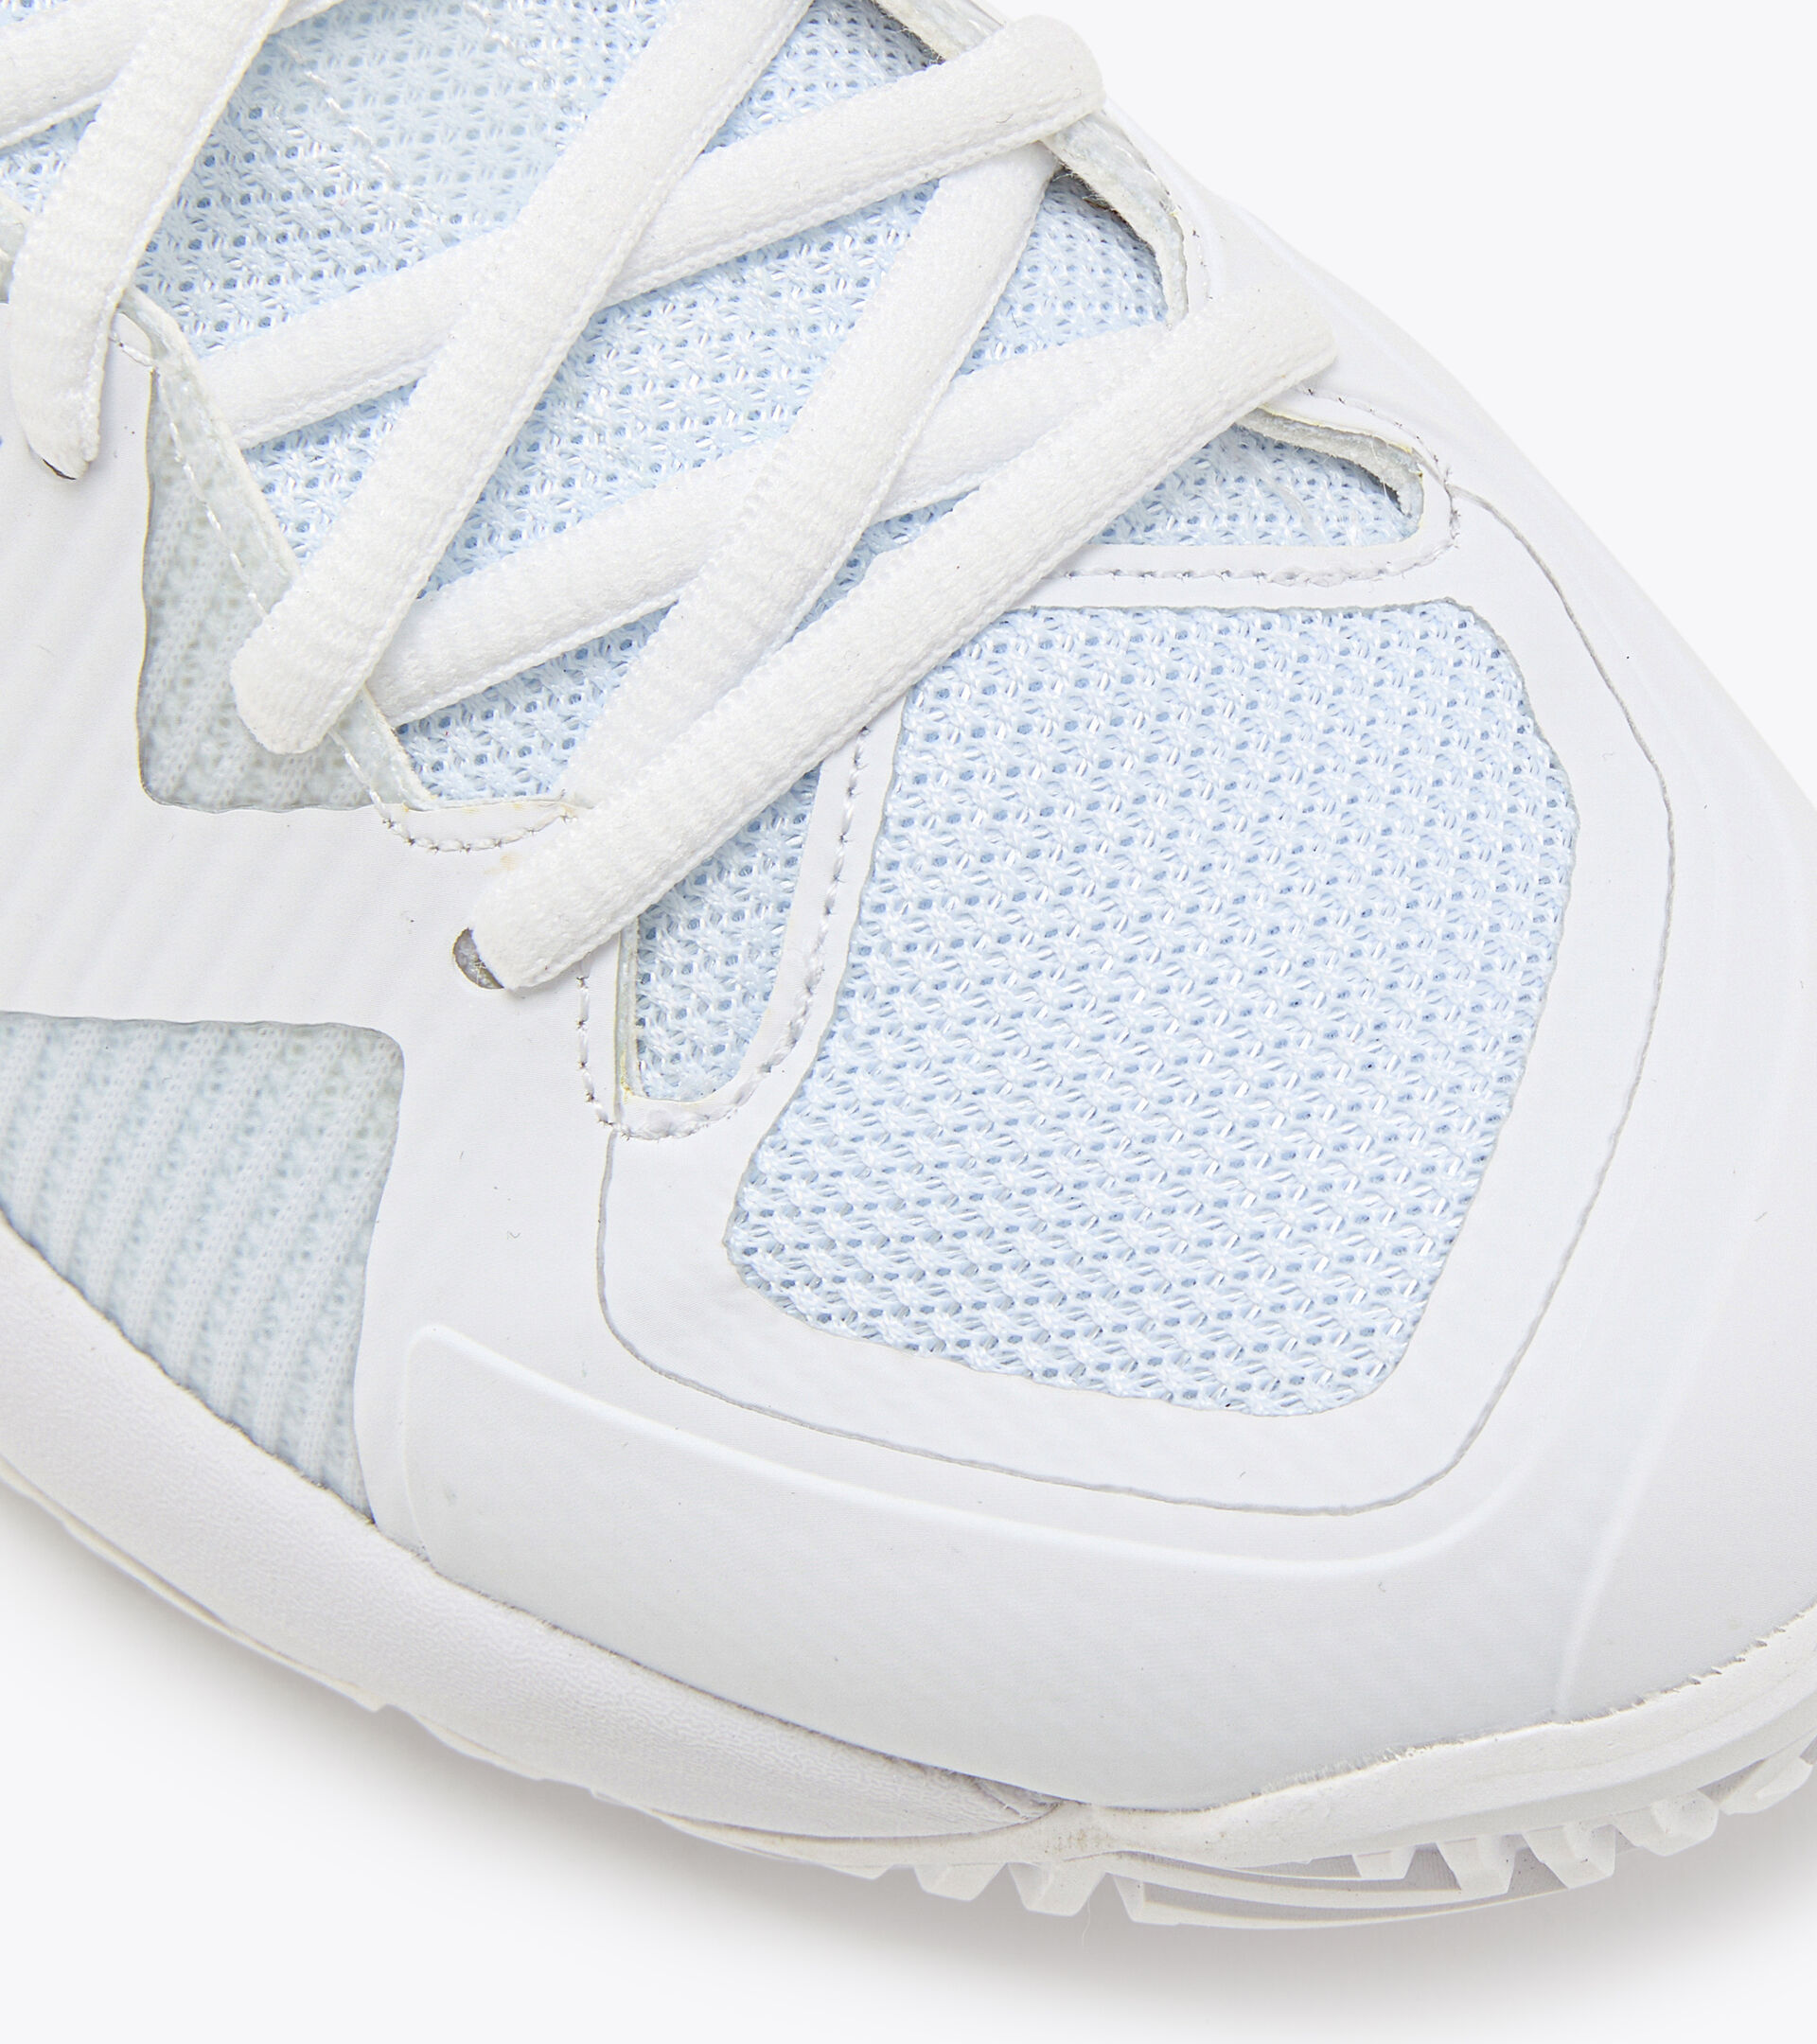 Tennis shoes for hard surfaces or clay courts - Women B.ICON 2 W AG WHITE/SILVER - Diadora